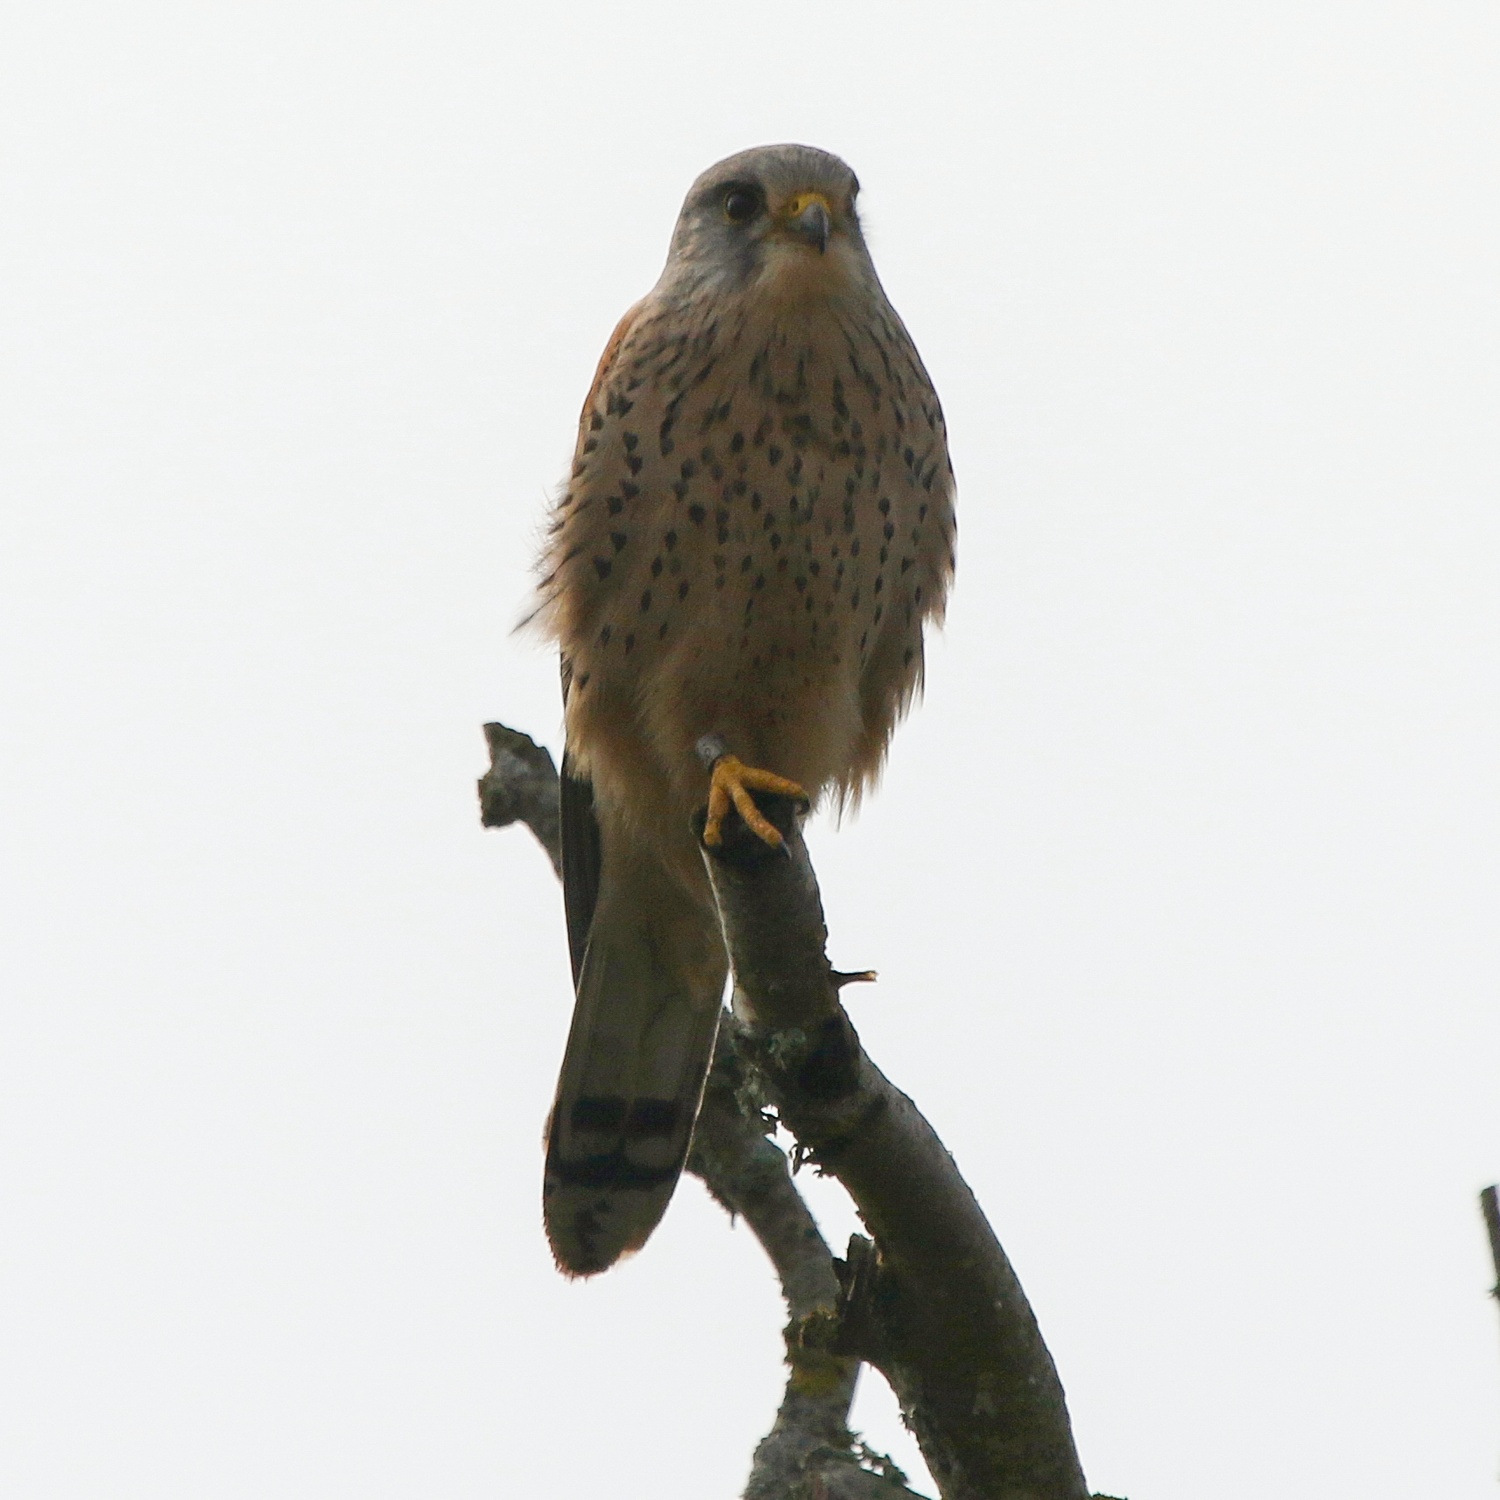 Kestrel sitting on a branch at top of tree with blue/white sky in the background